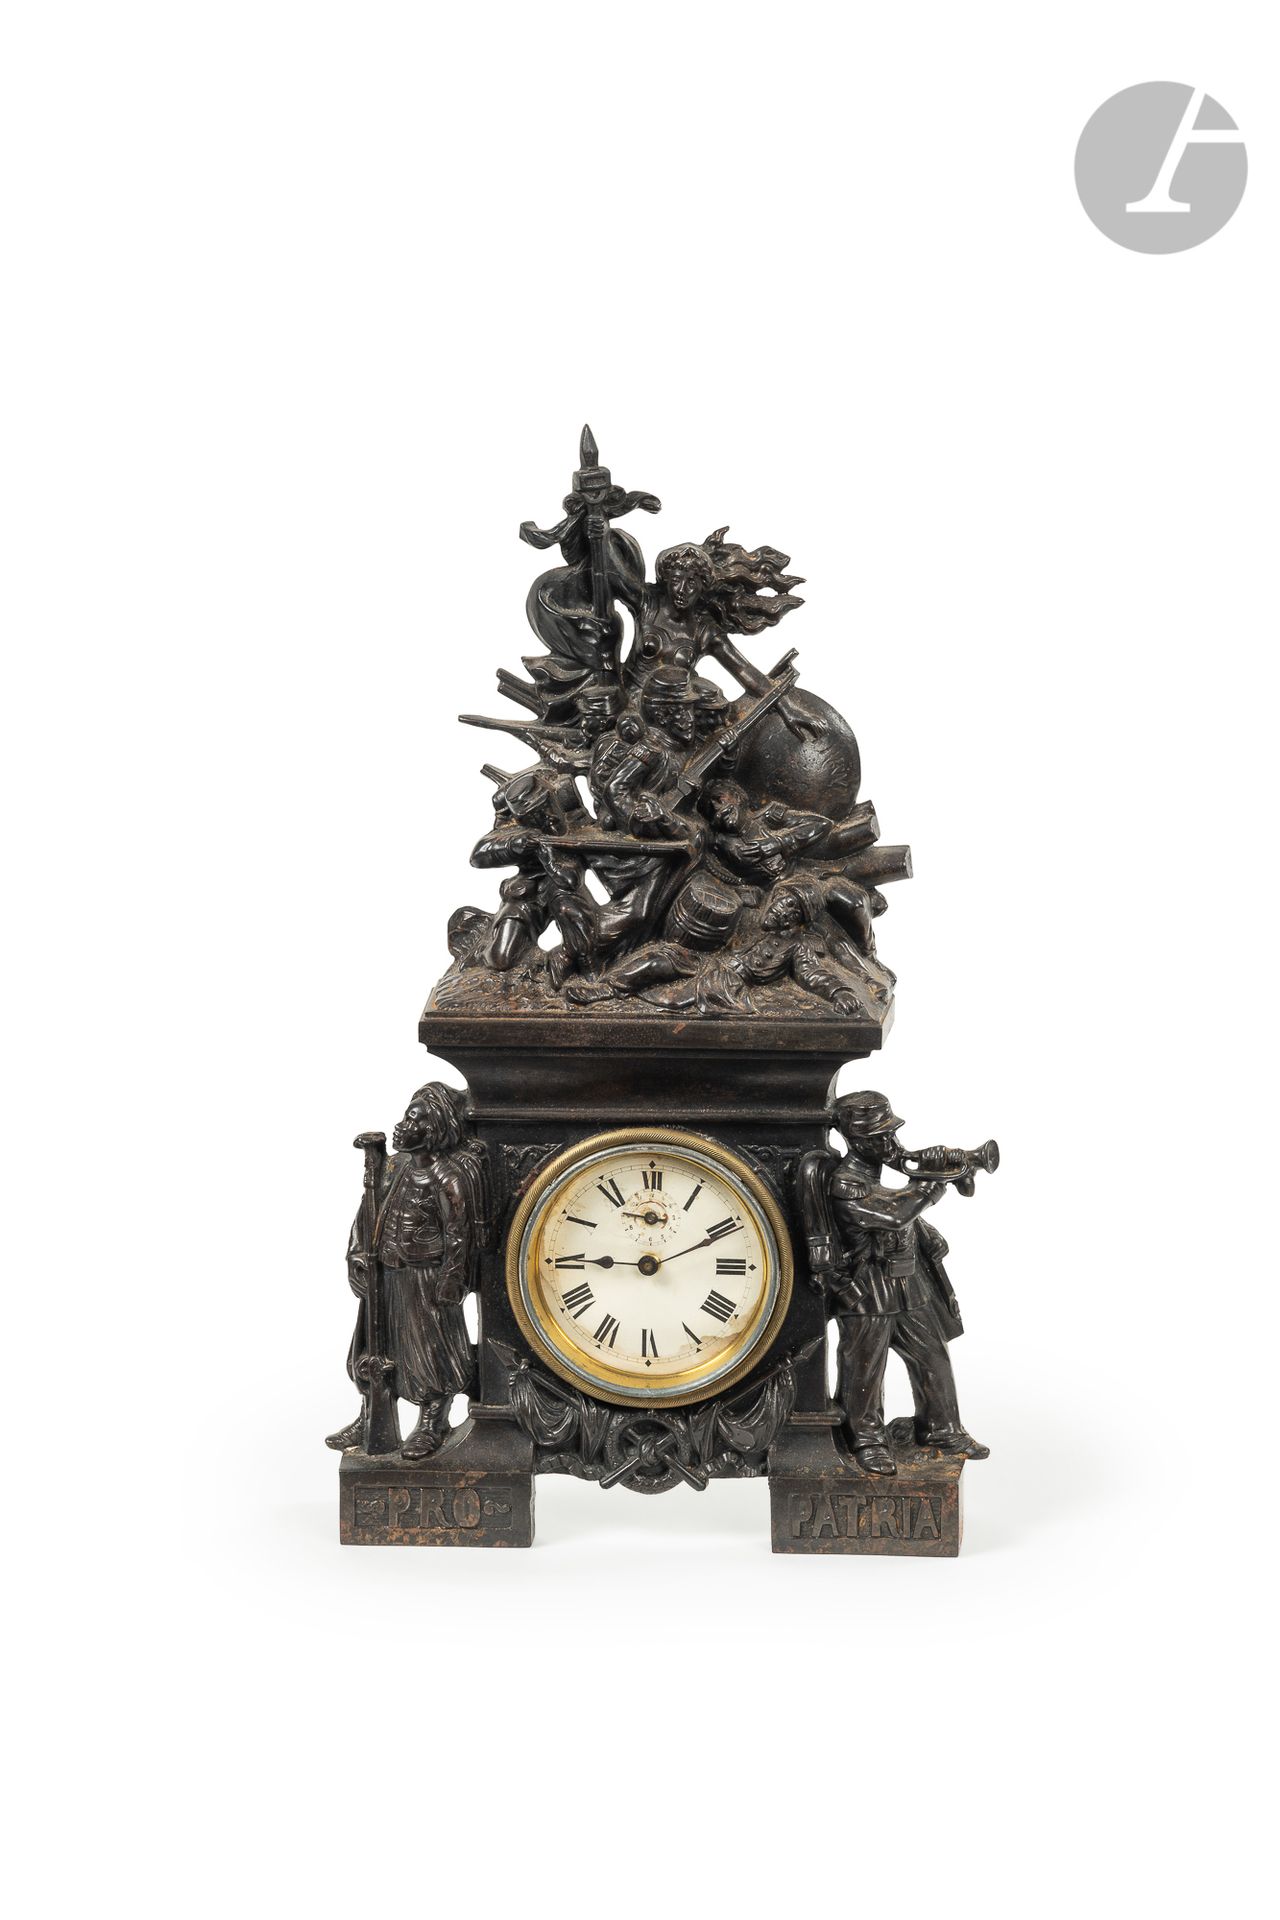 Null "PRO PATRIA. 1870 " 
Cast iron clock with a patina and decorated with an al&hellip;